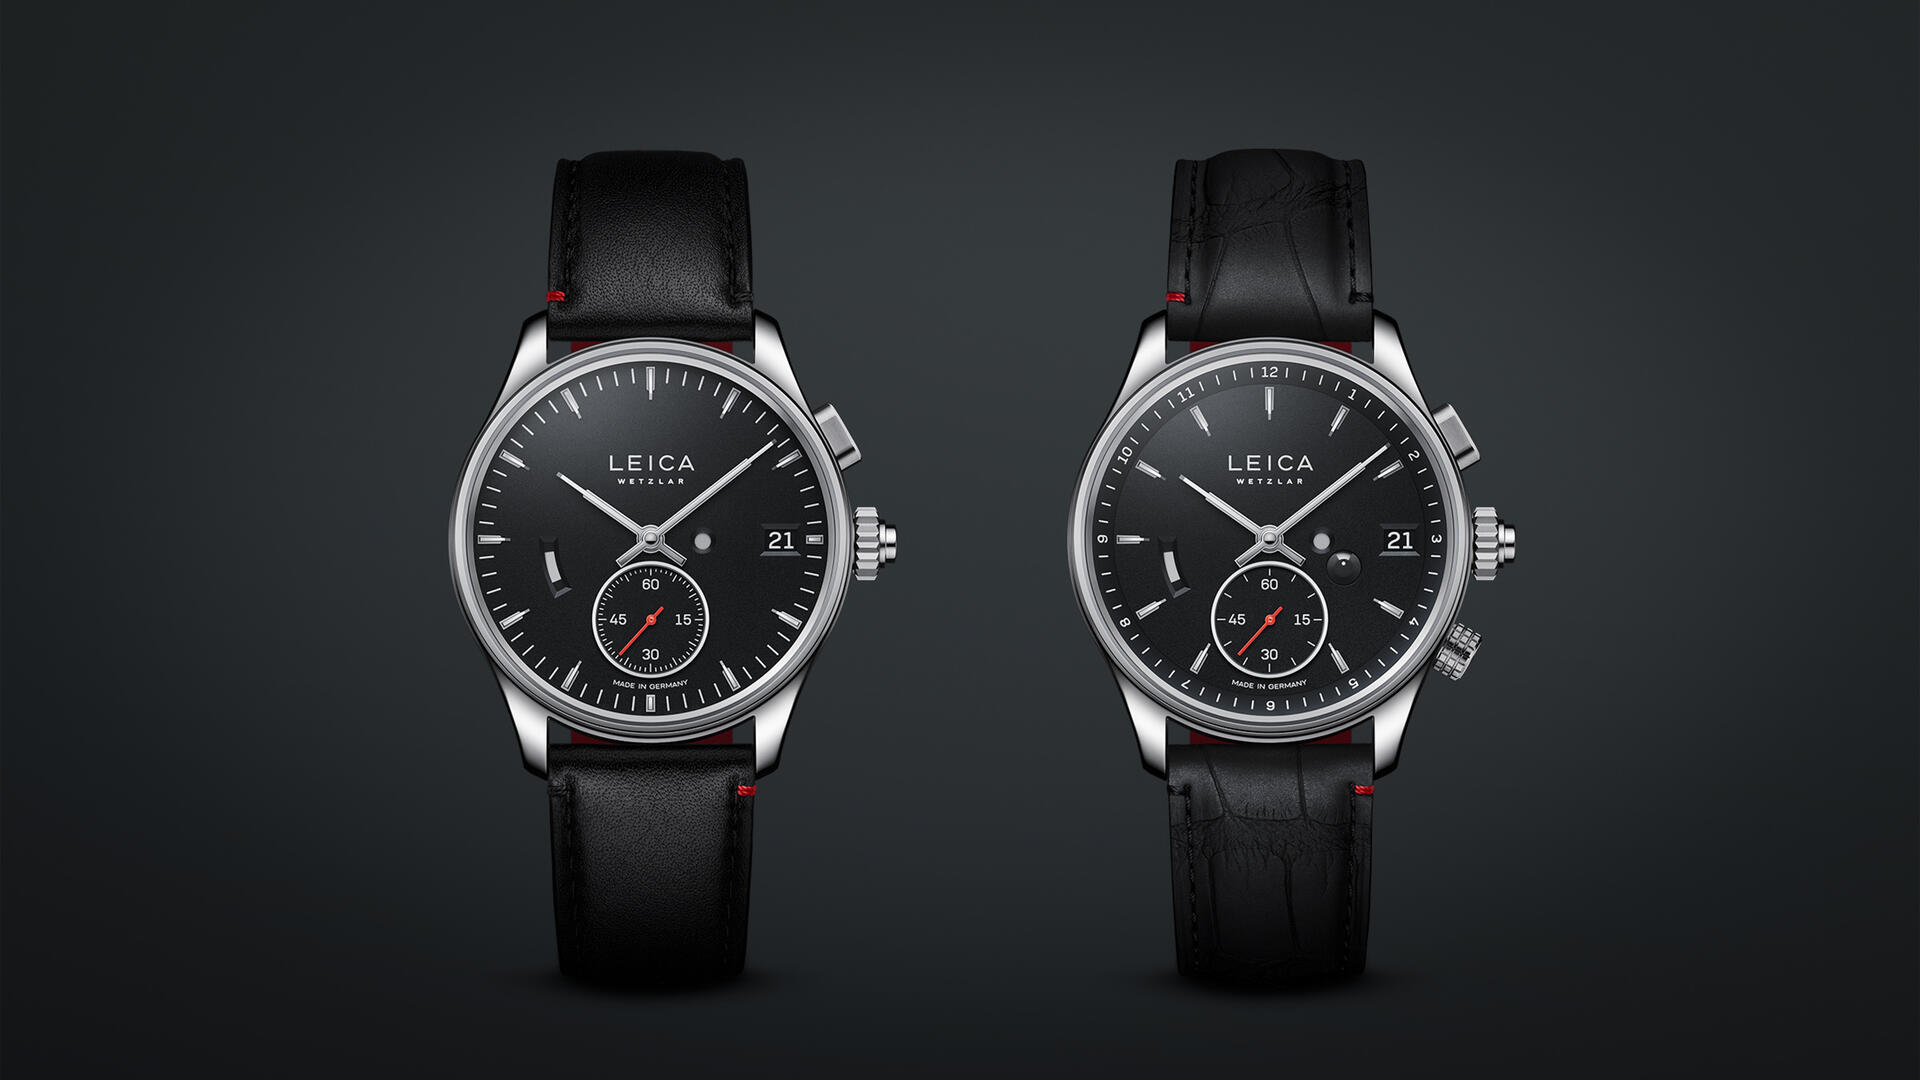 Leica introduces a second watch inspired by the M11 Monochrom - Acquire